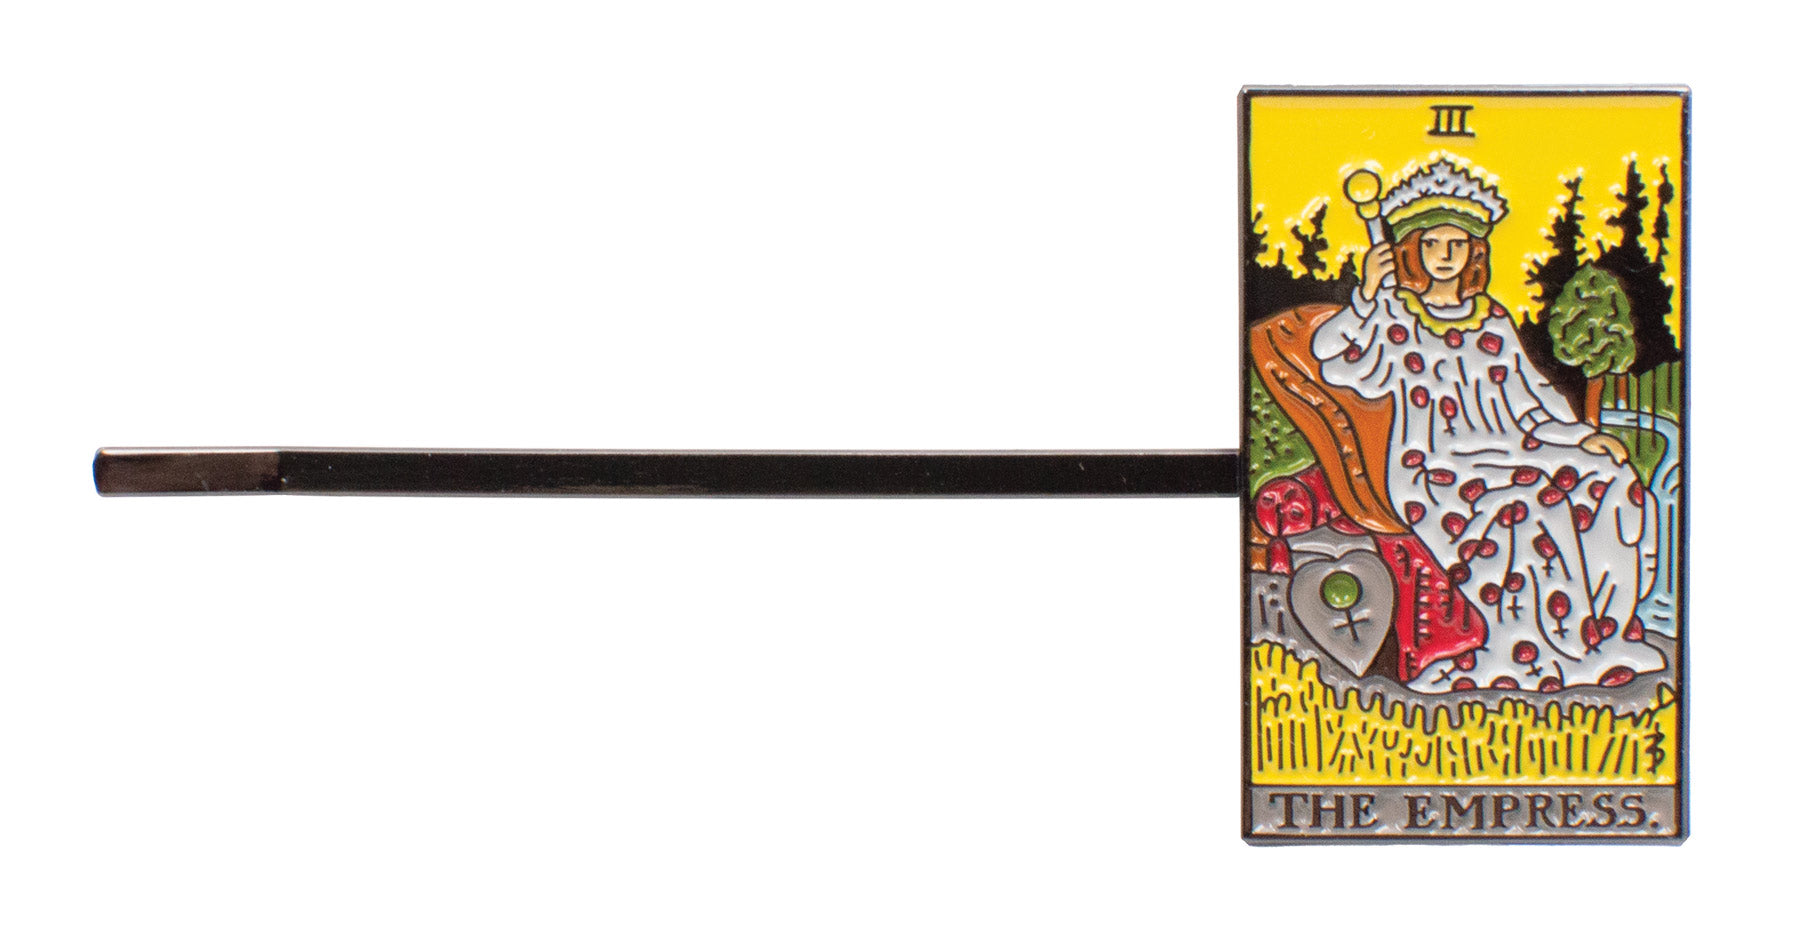 Product photo of Tarot Righteous Feminine Hair Pins, a novelty gift manufactured by The Unemployed Philosophers Guild.